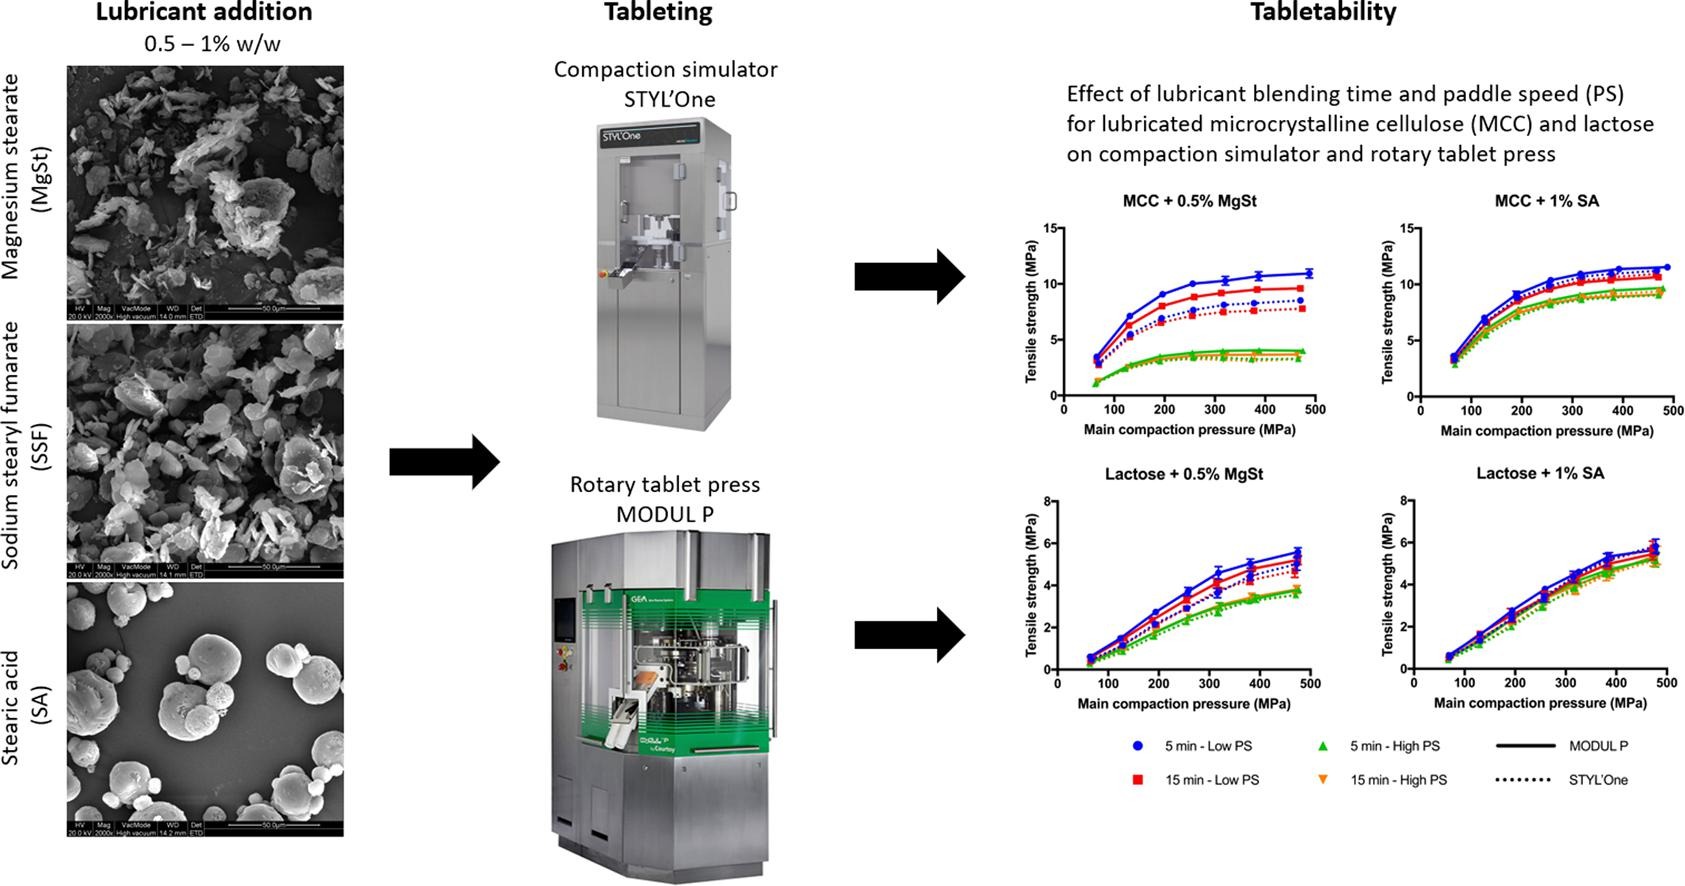 Effect of feed frame on lubricant sensitivity during upscaling from a compaction simulator to a rotary tablet press